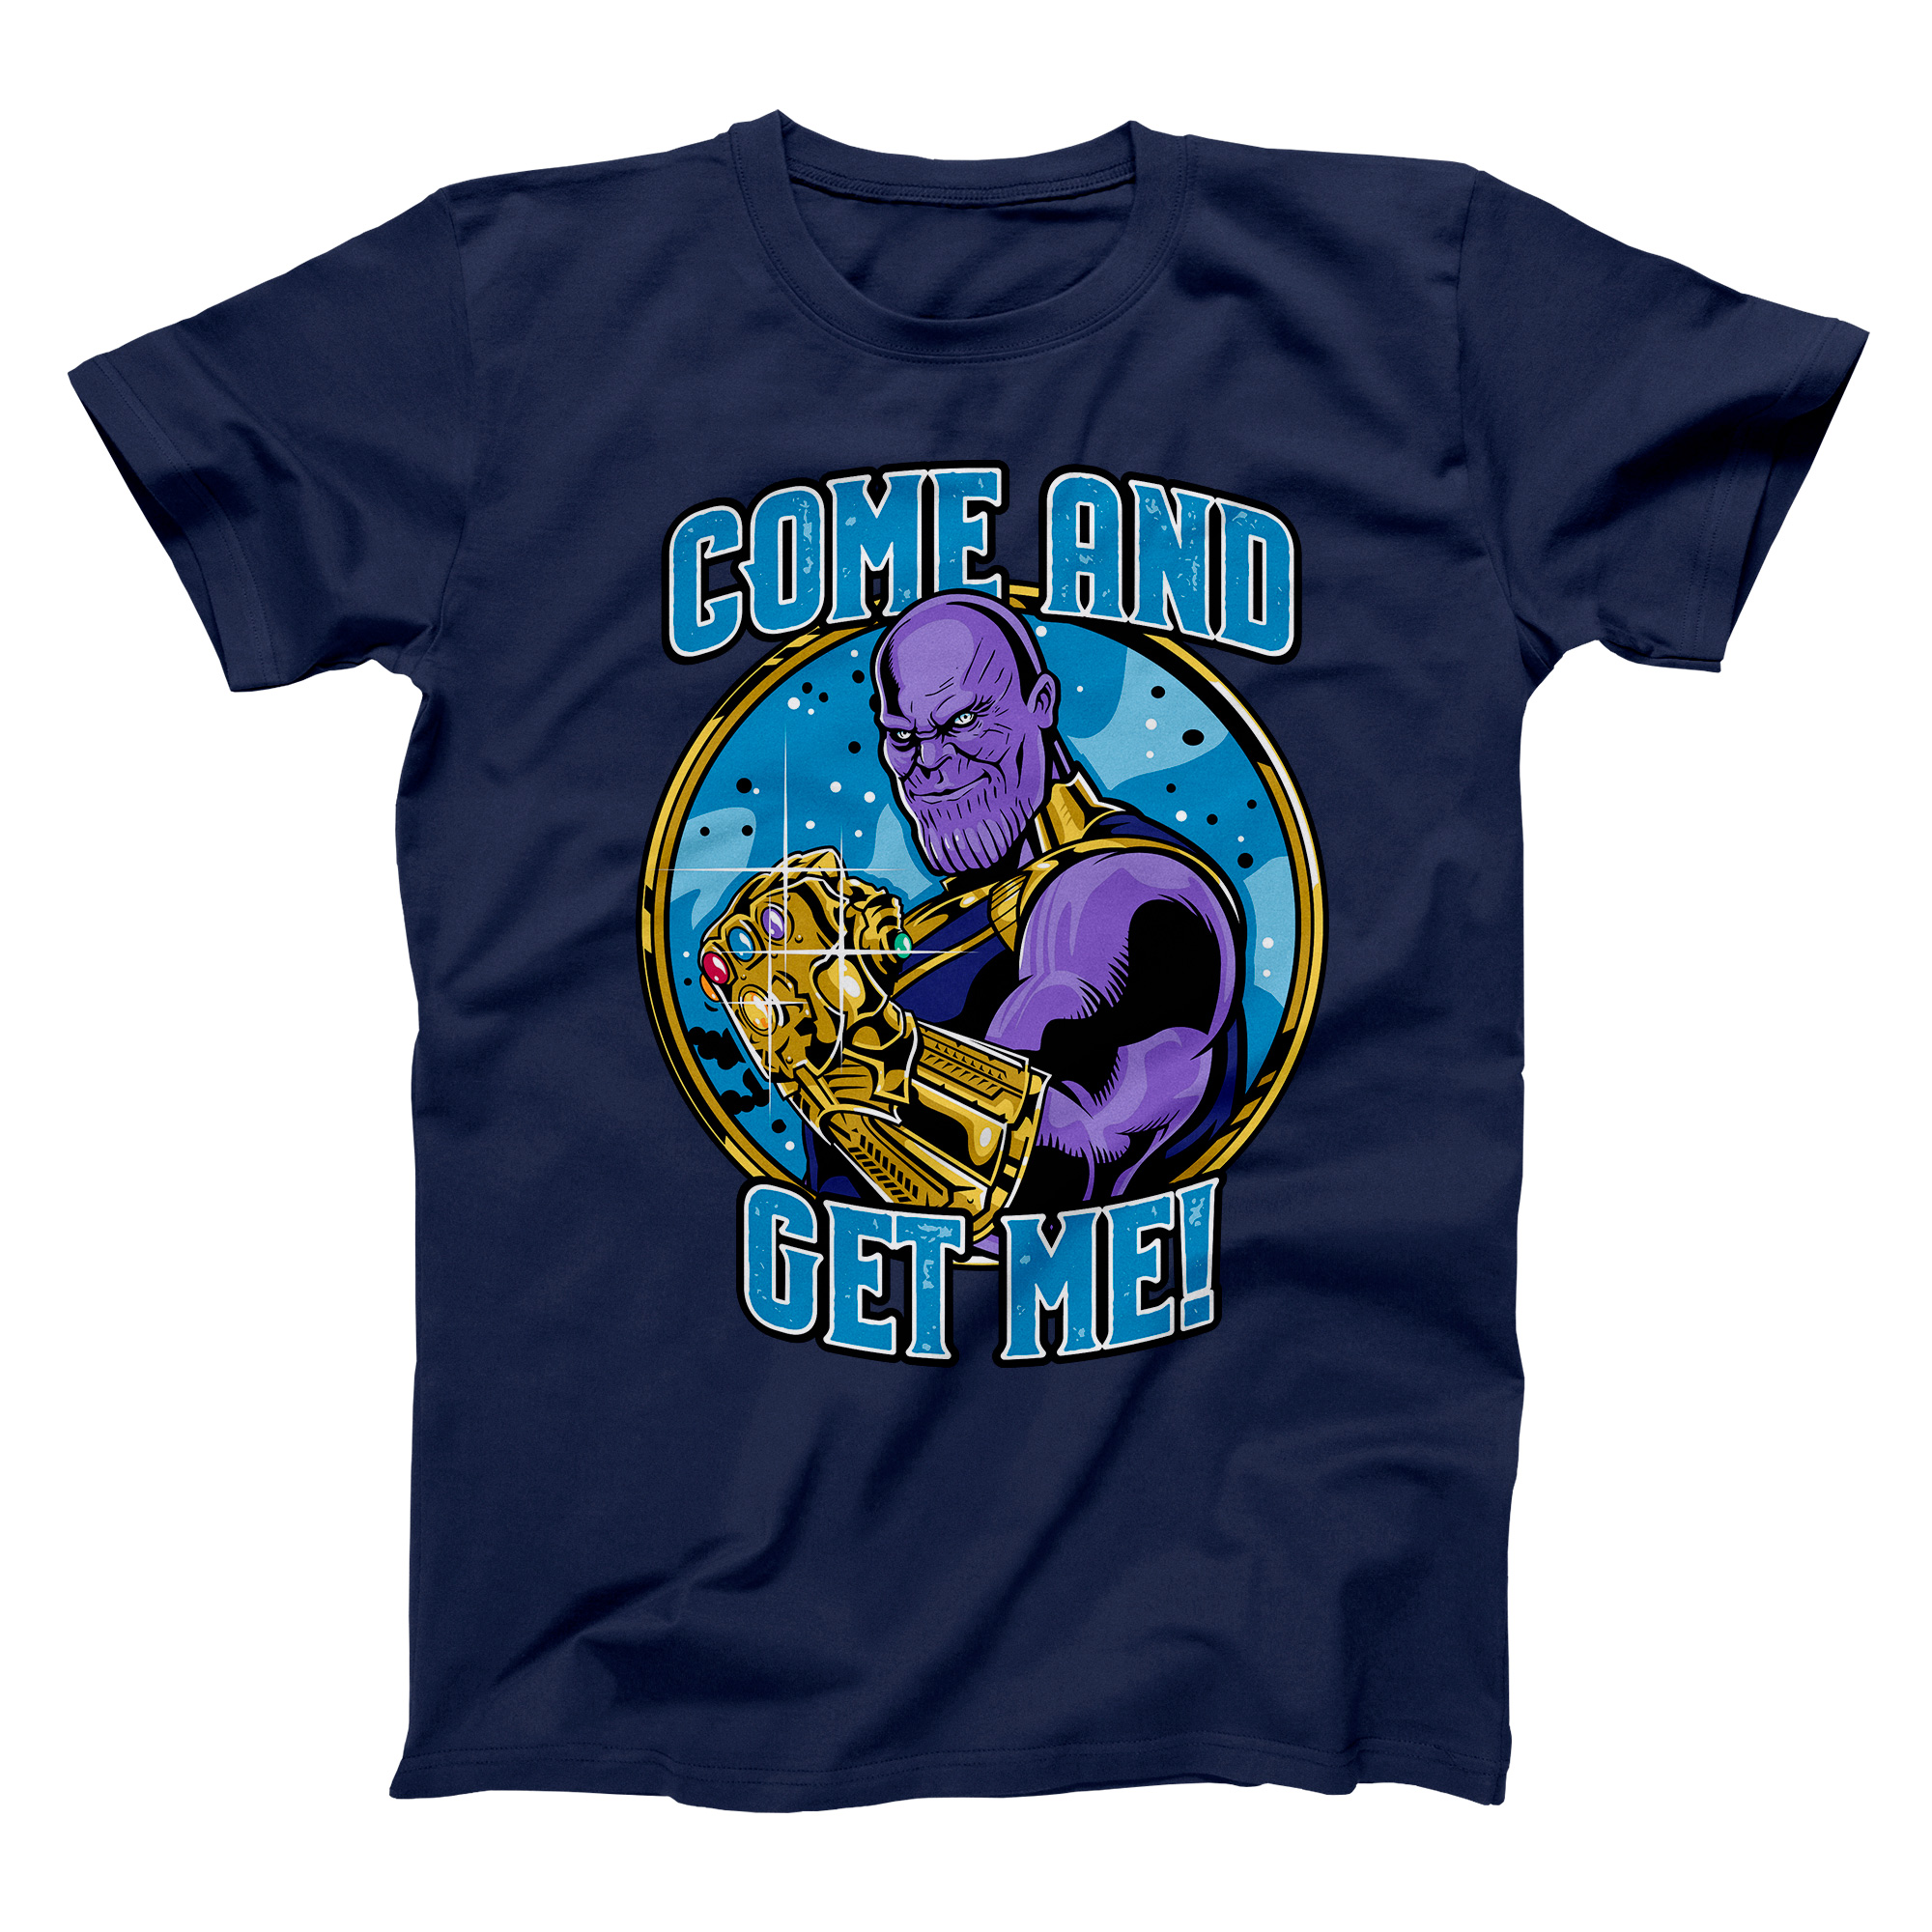 Avengers Infinity War - Come and Get Me!